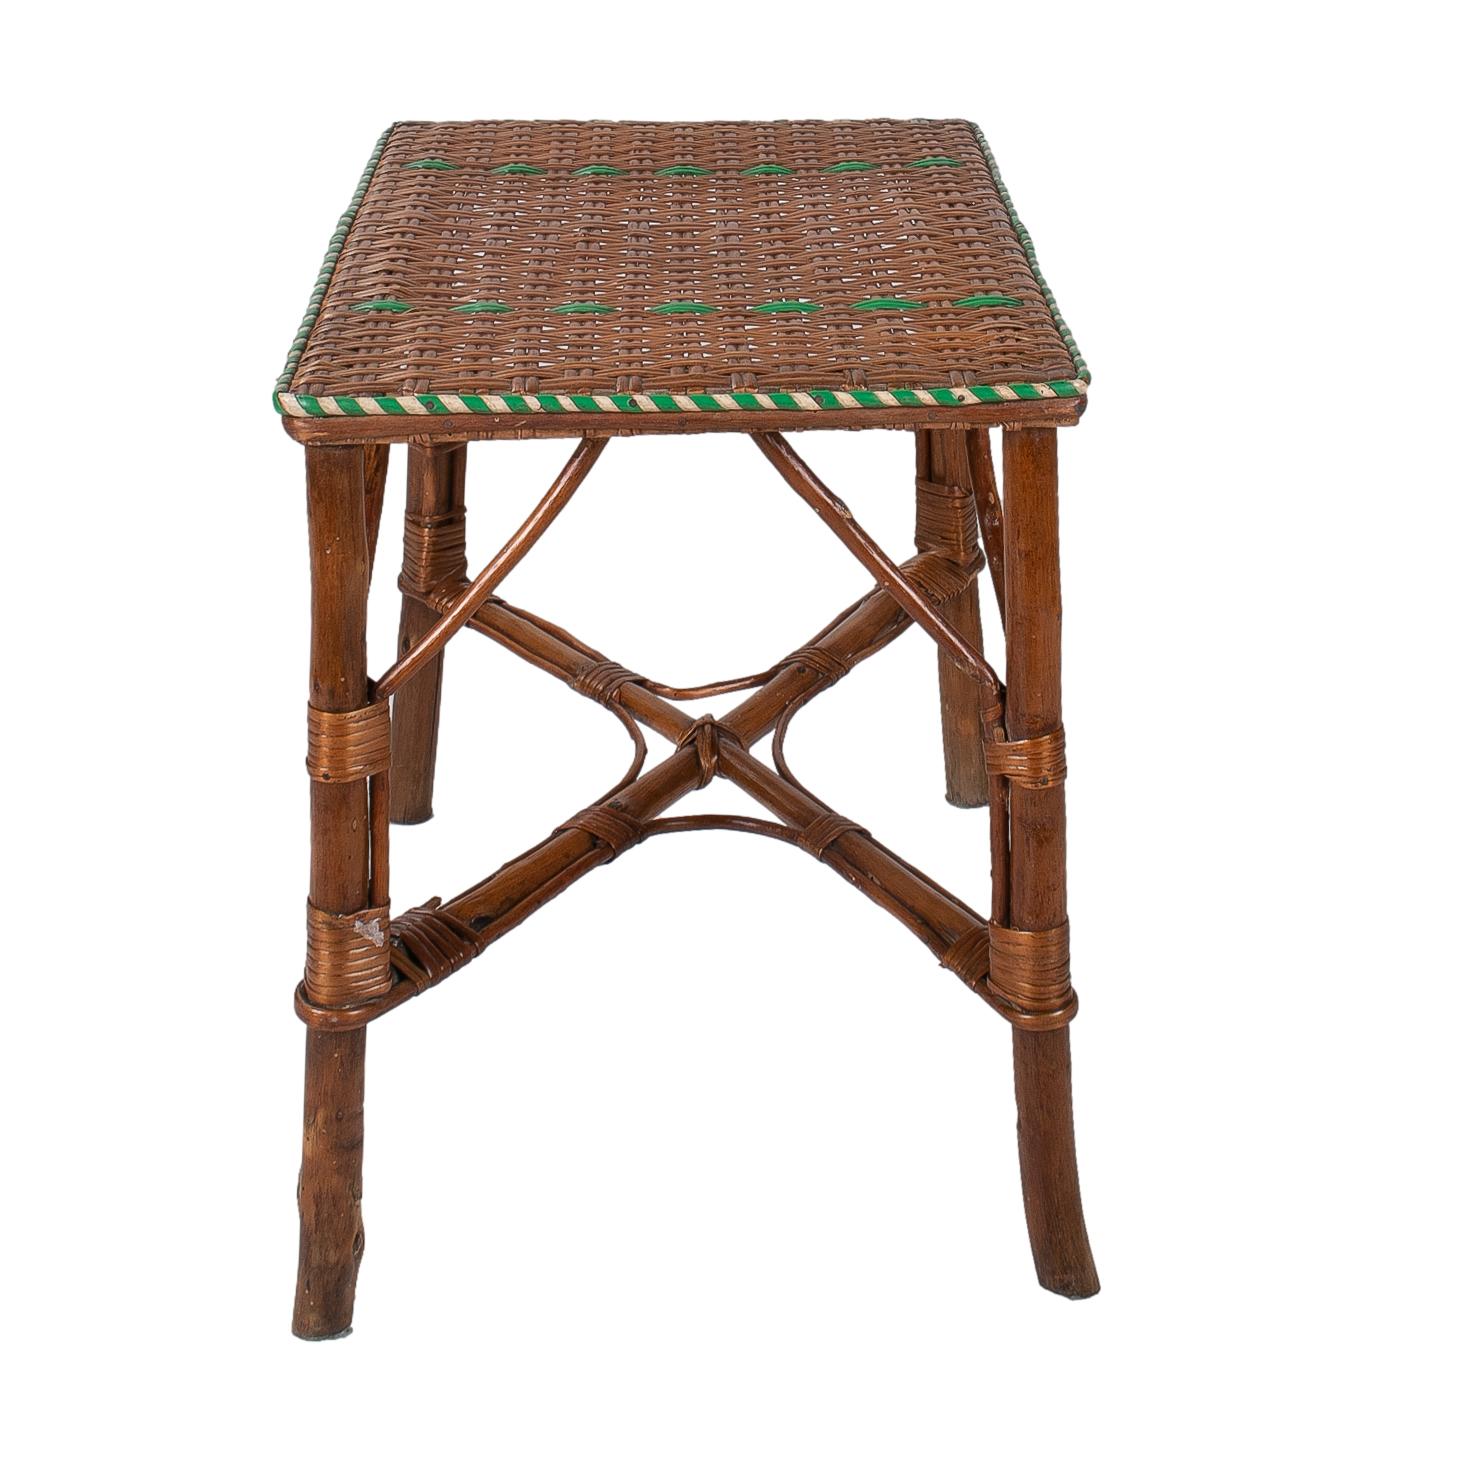 20th Century 1950s Spanish Children's Size Lace Wicker & Bamboo Table